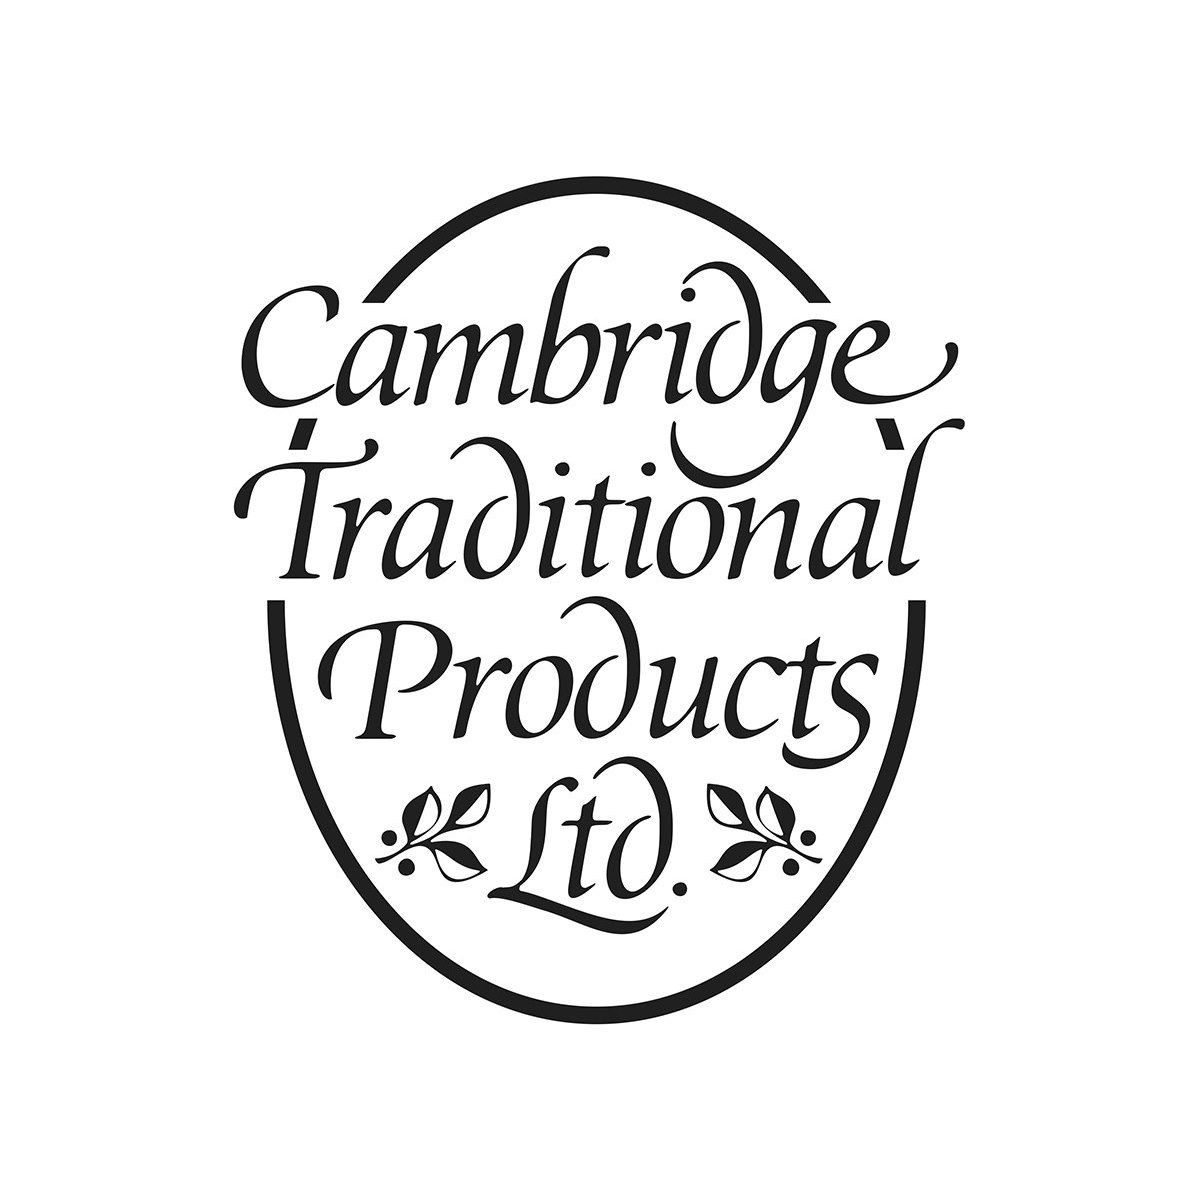 Where to Buy Cambridge Traditional Products